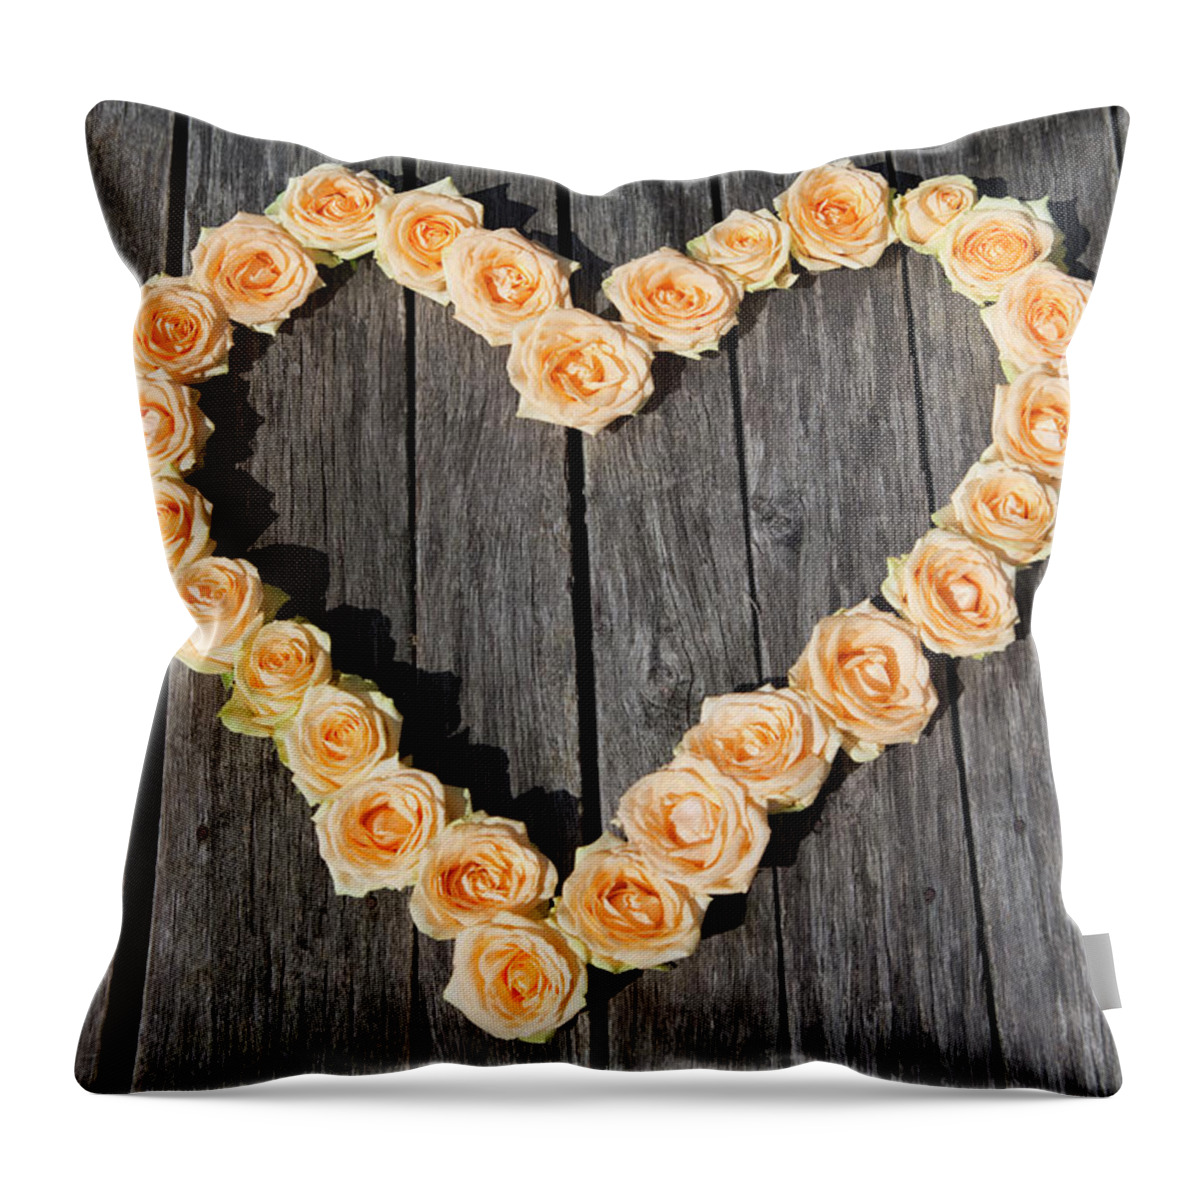 Orange Color Throw Pillow featuring the photograph Roses Arranged In Heart Shape by Judith Haeusler